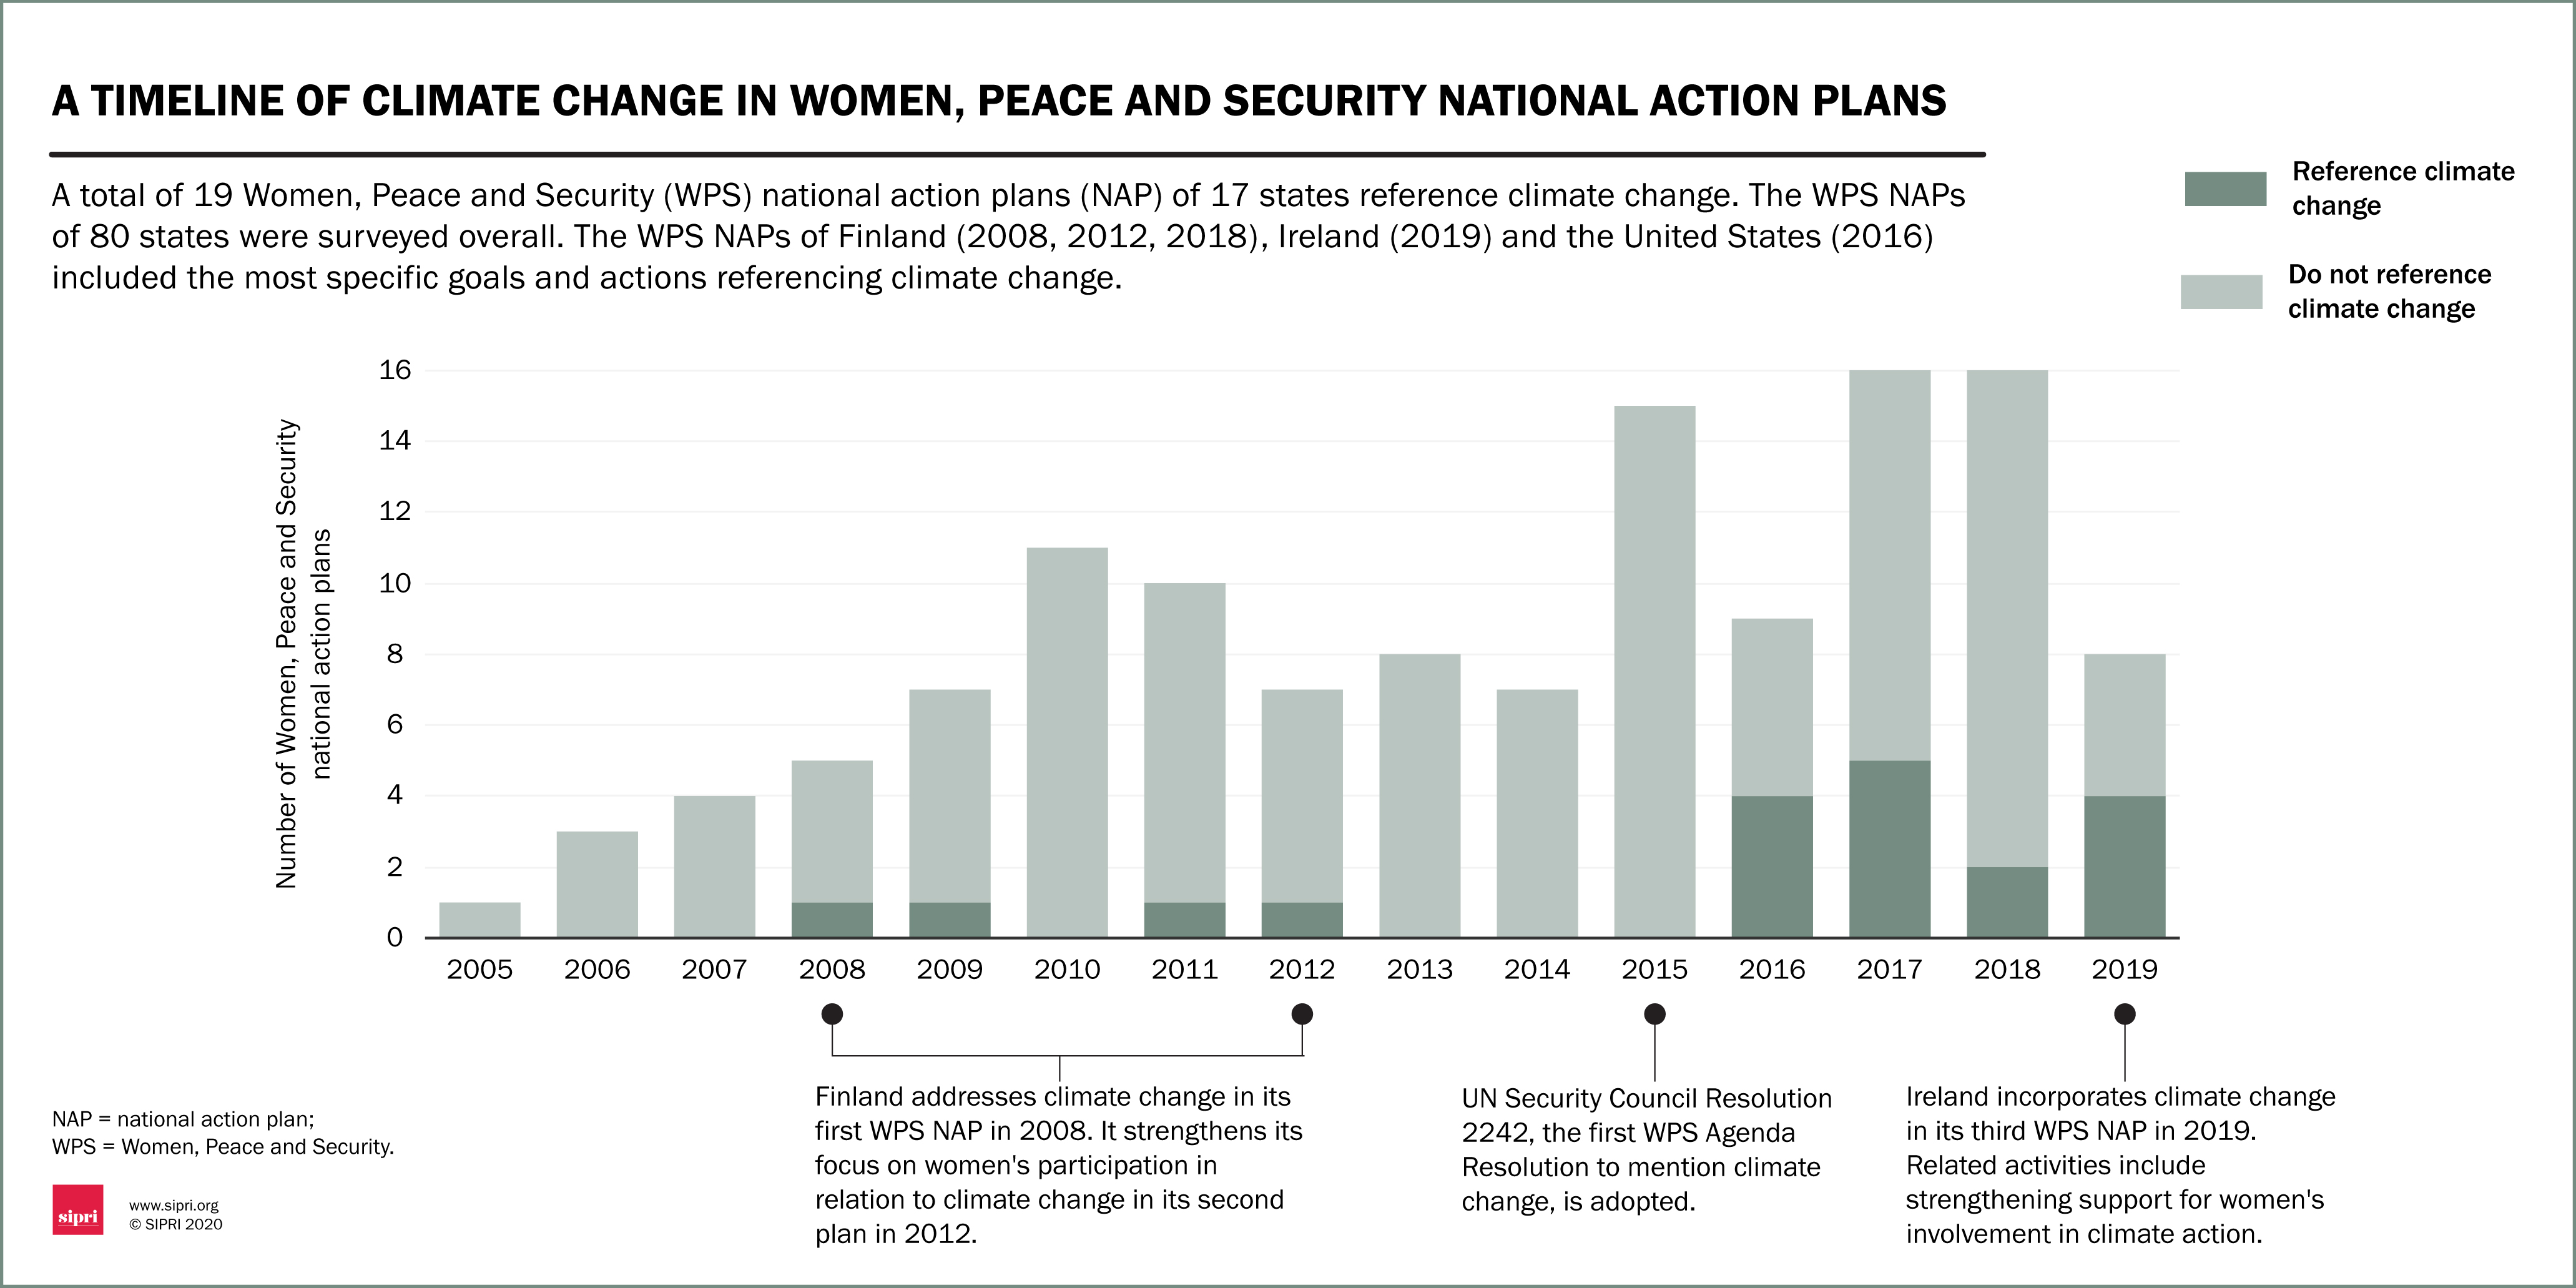 A timeline of climate change in Women, Peace and Security national action plans